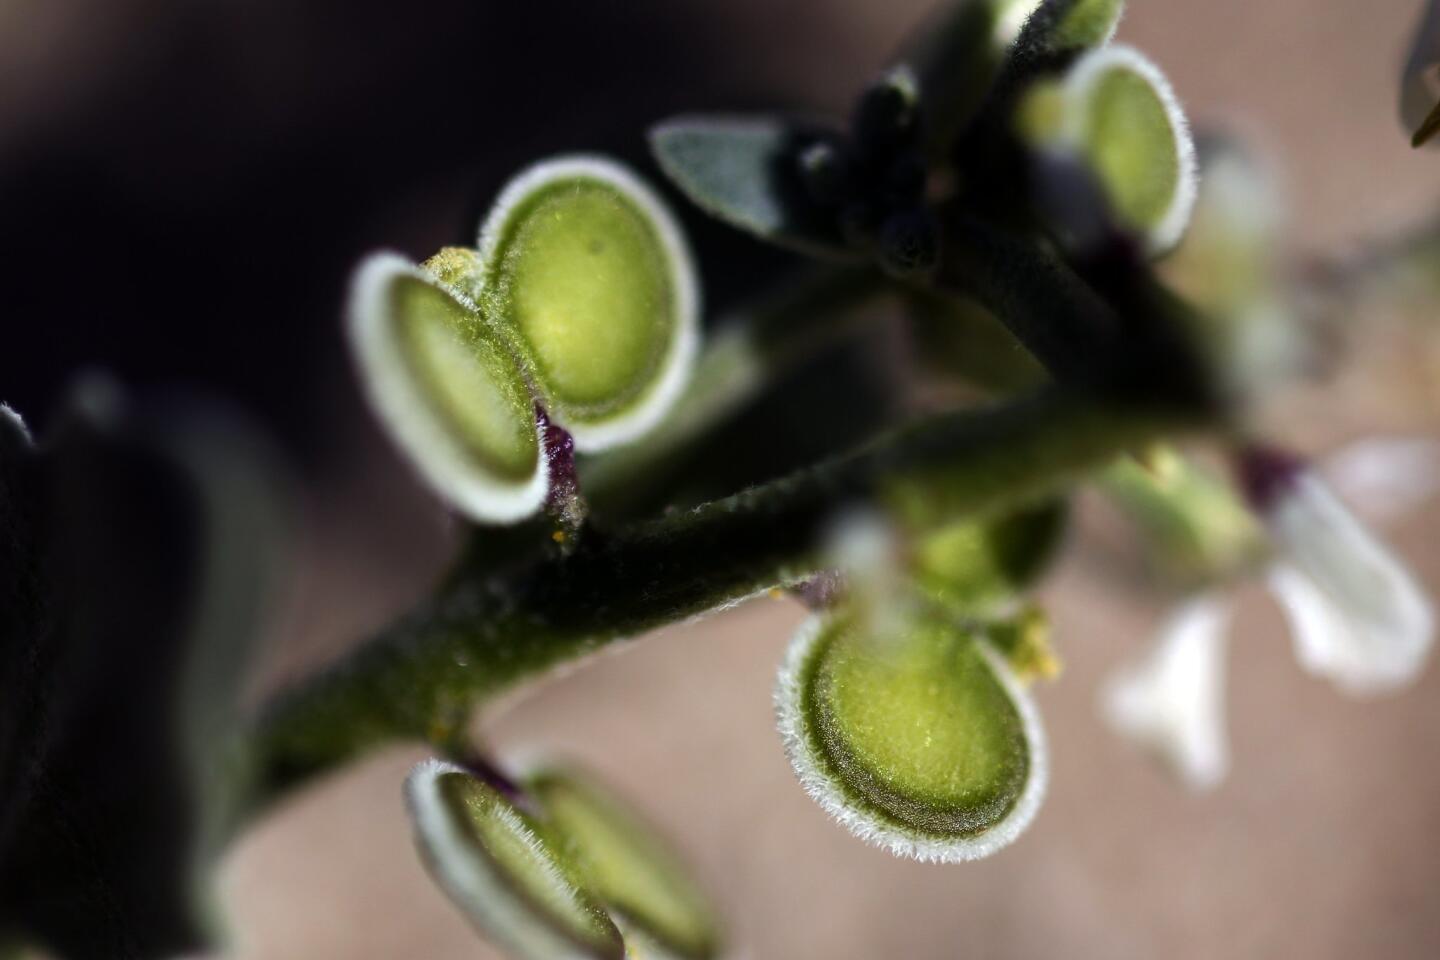 The Spectacle Pod (Dithyrea californica) is just one of the amazing, little plants found during the bloom in the Anza-Borrego Desert State Park.